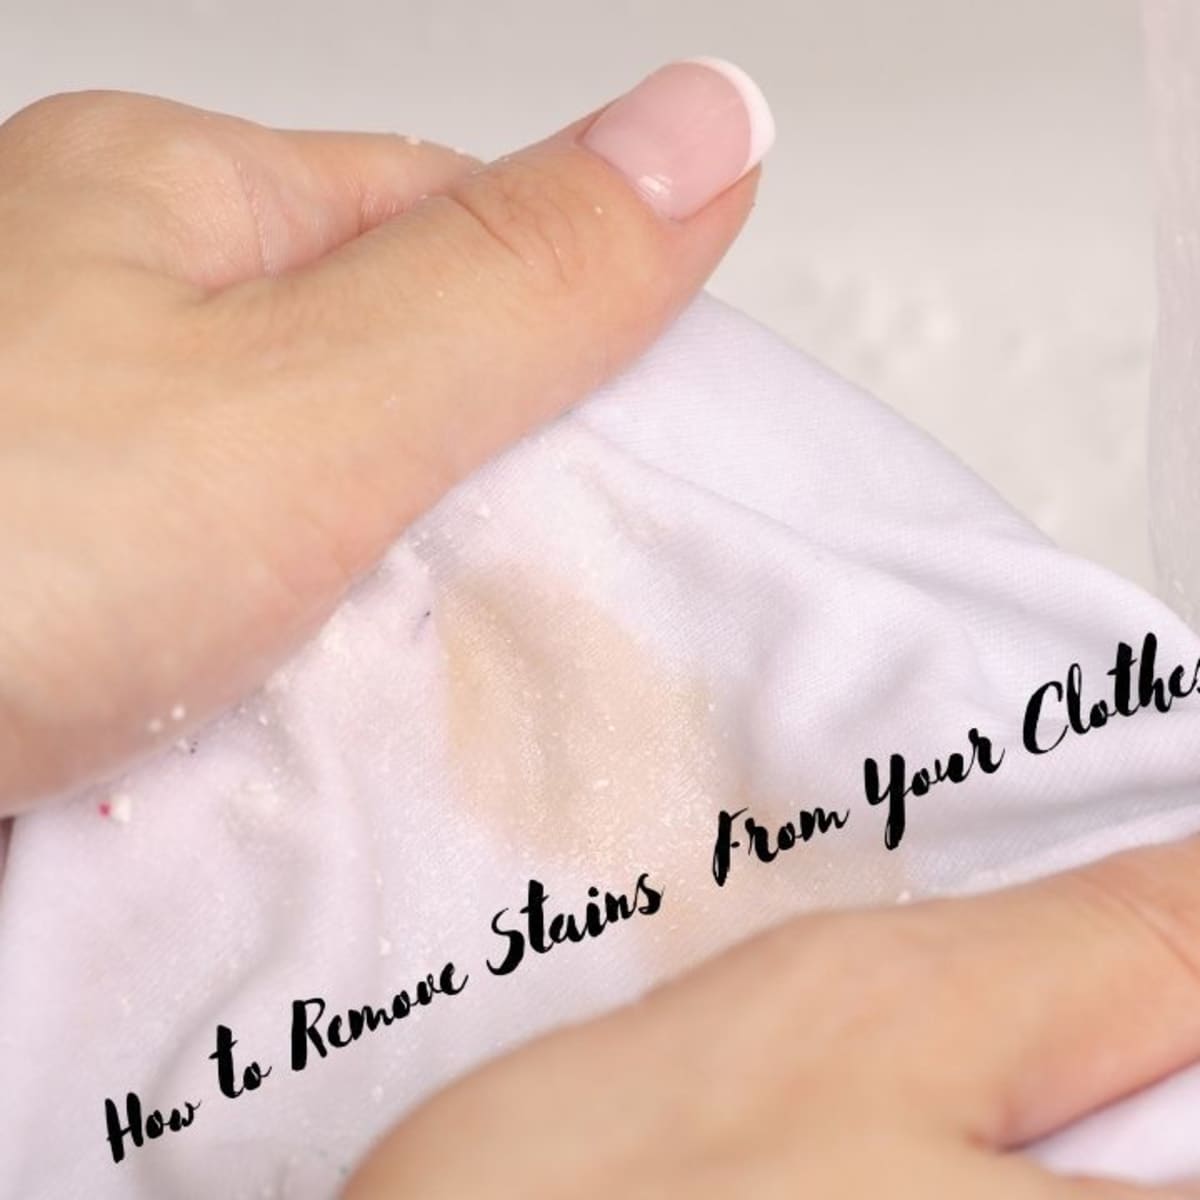 How To Remove Blood Stains From Clothes